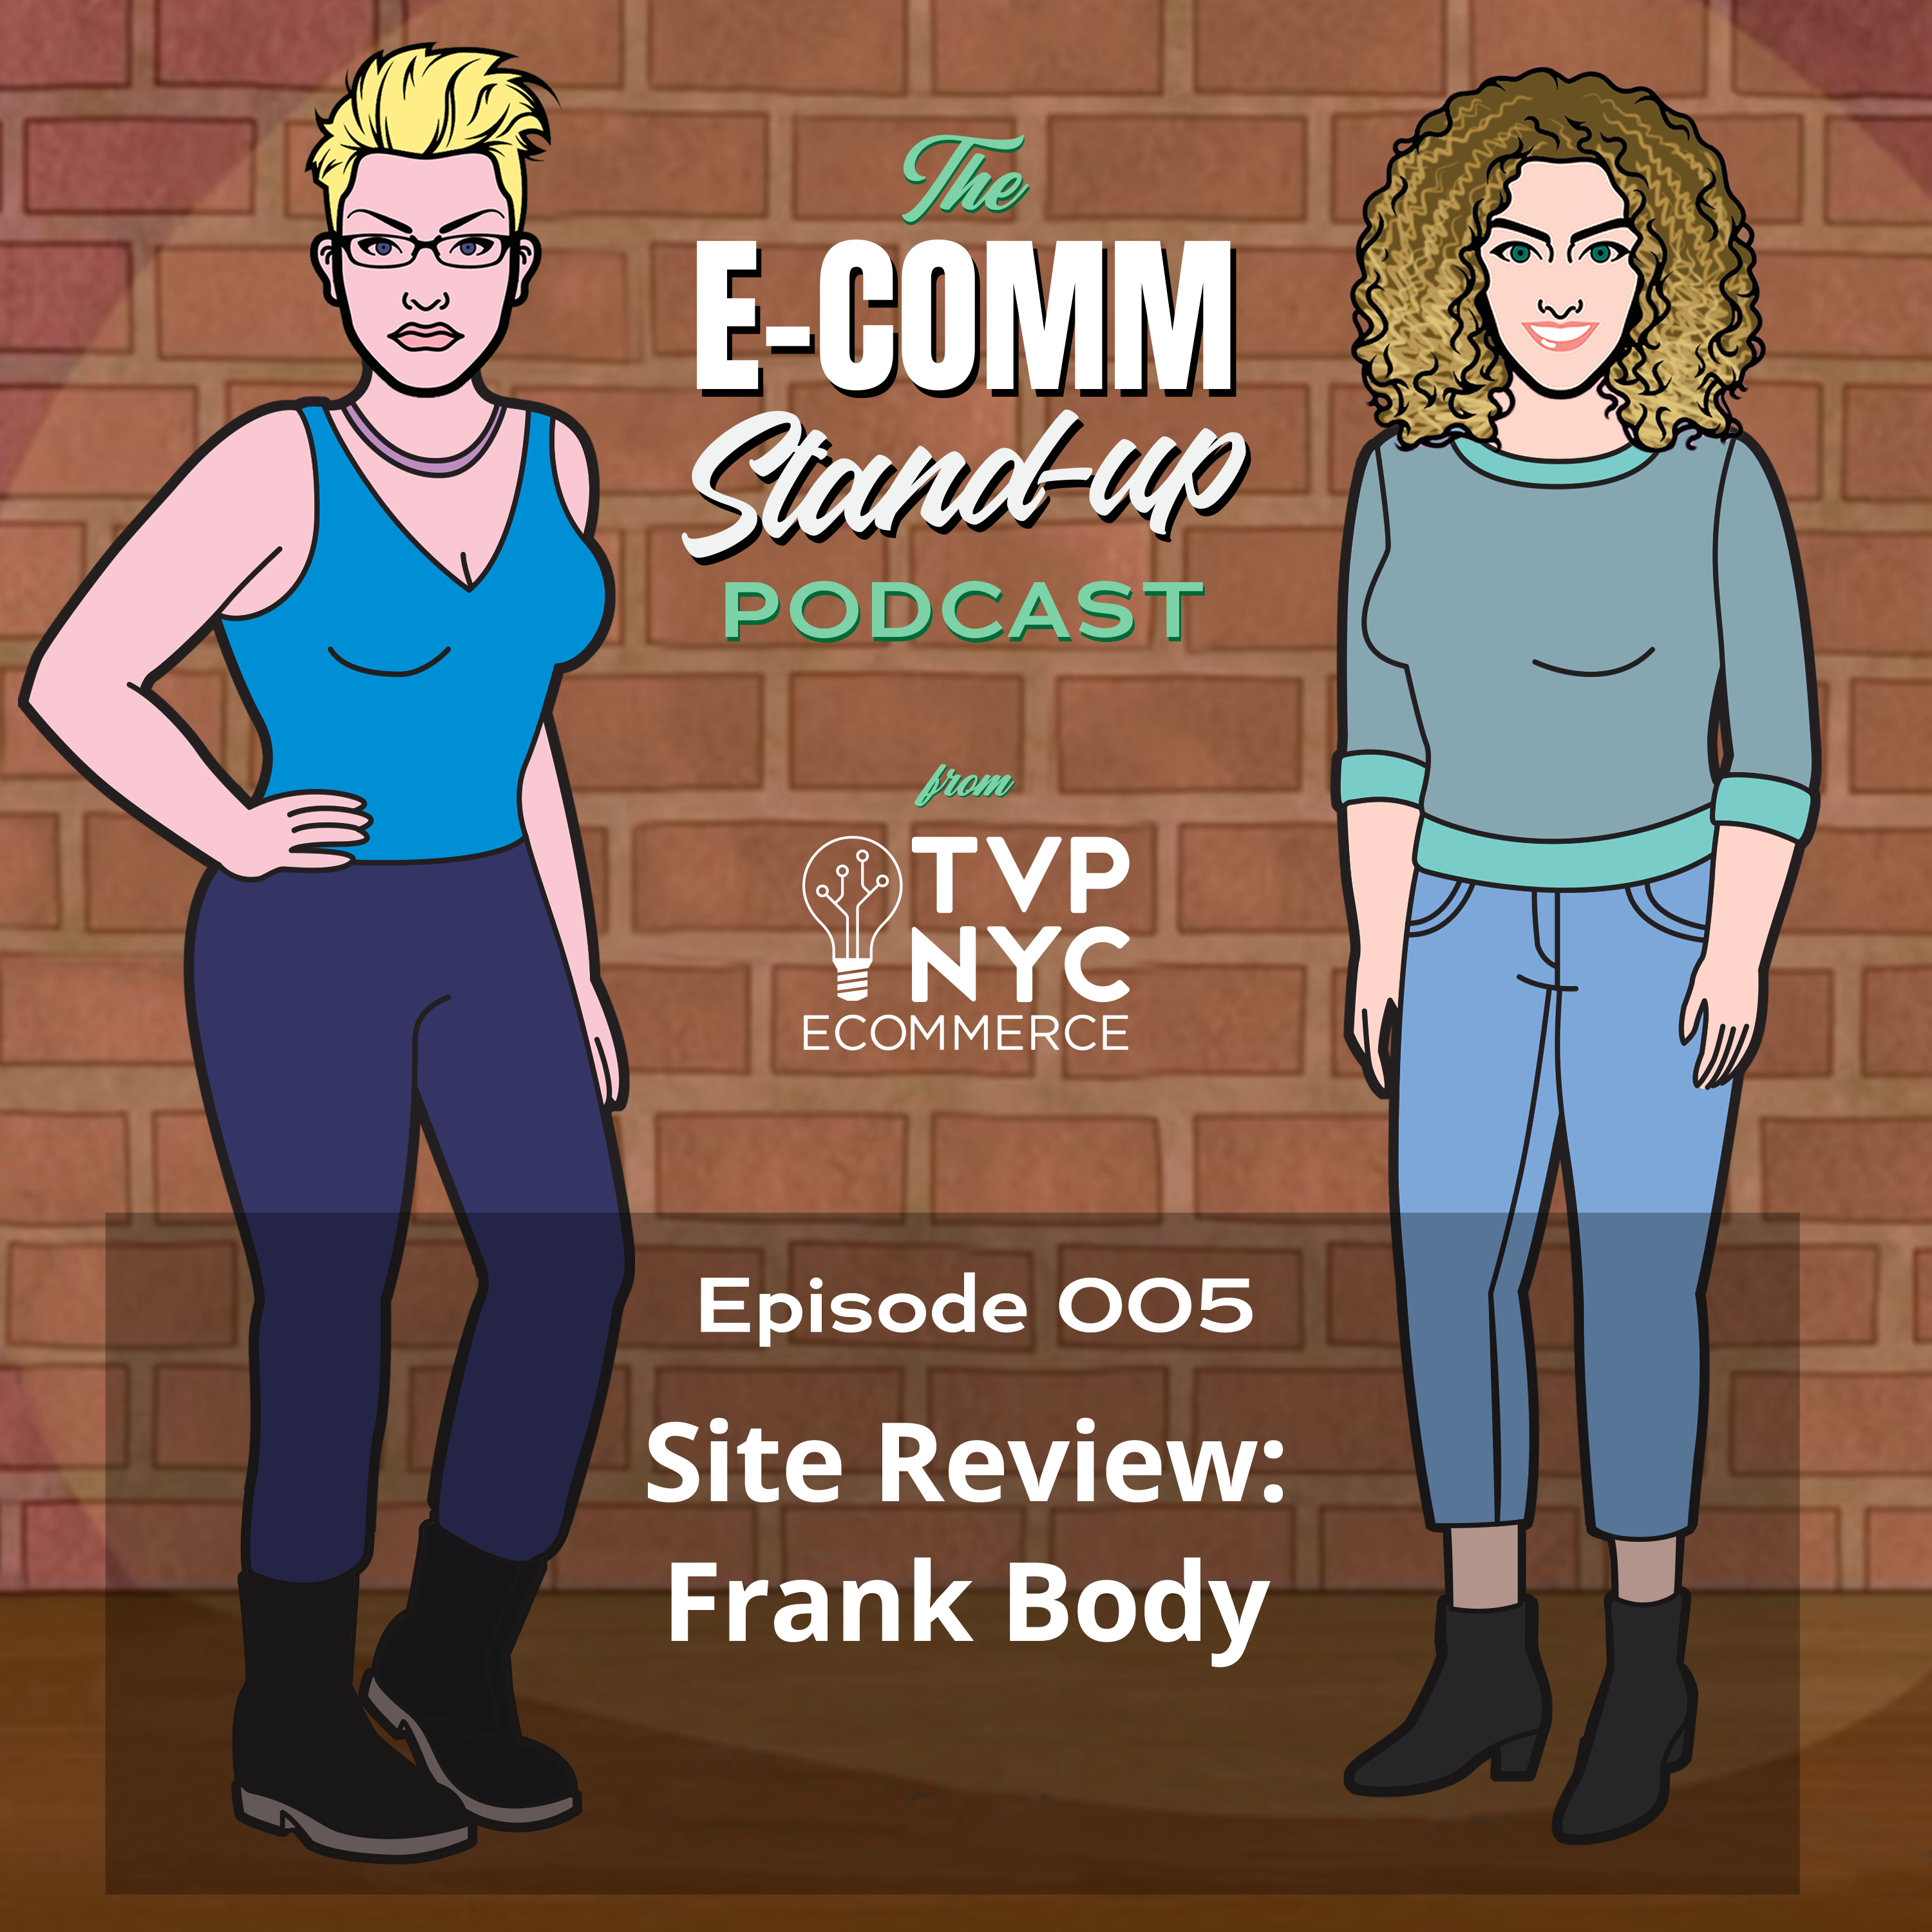 [Podcast] Store Review: Frank Body